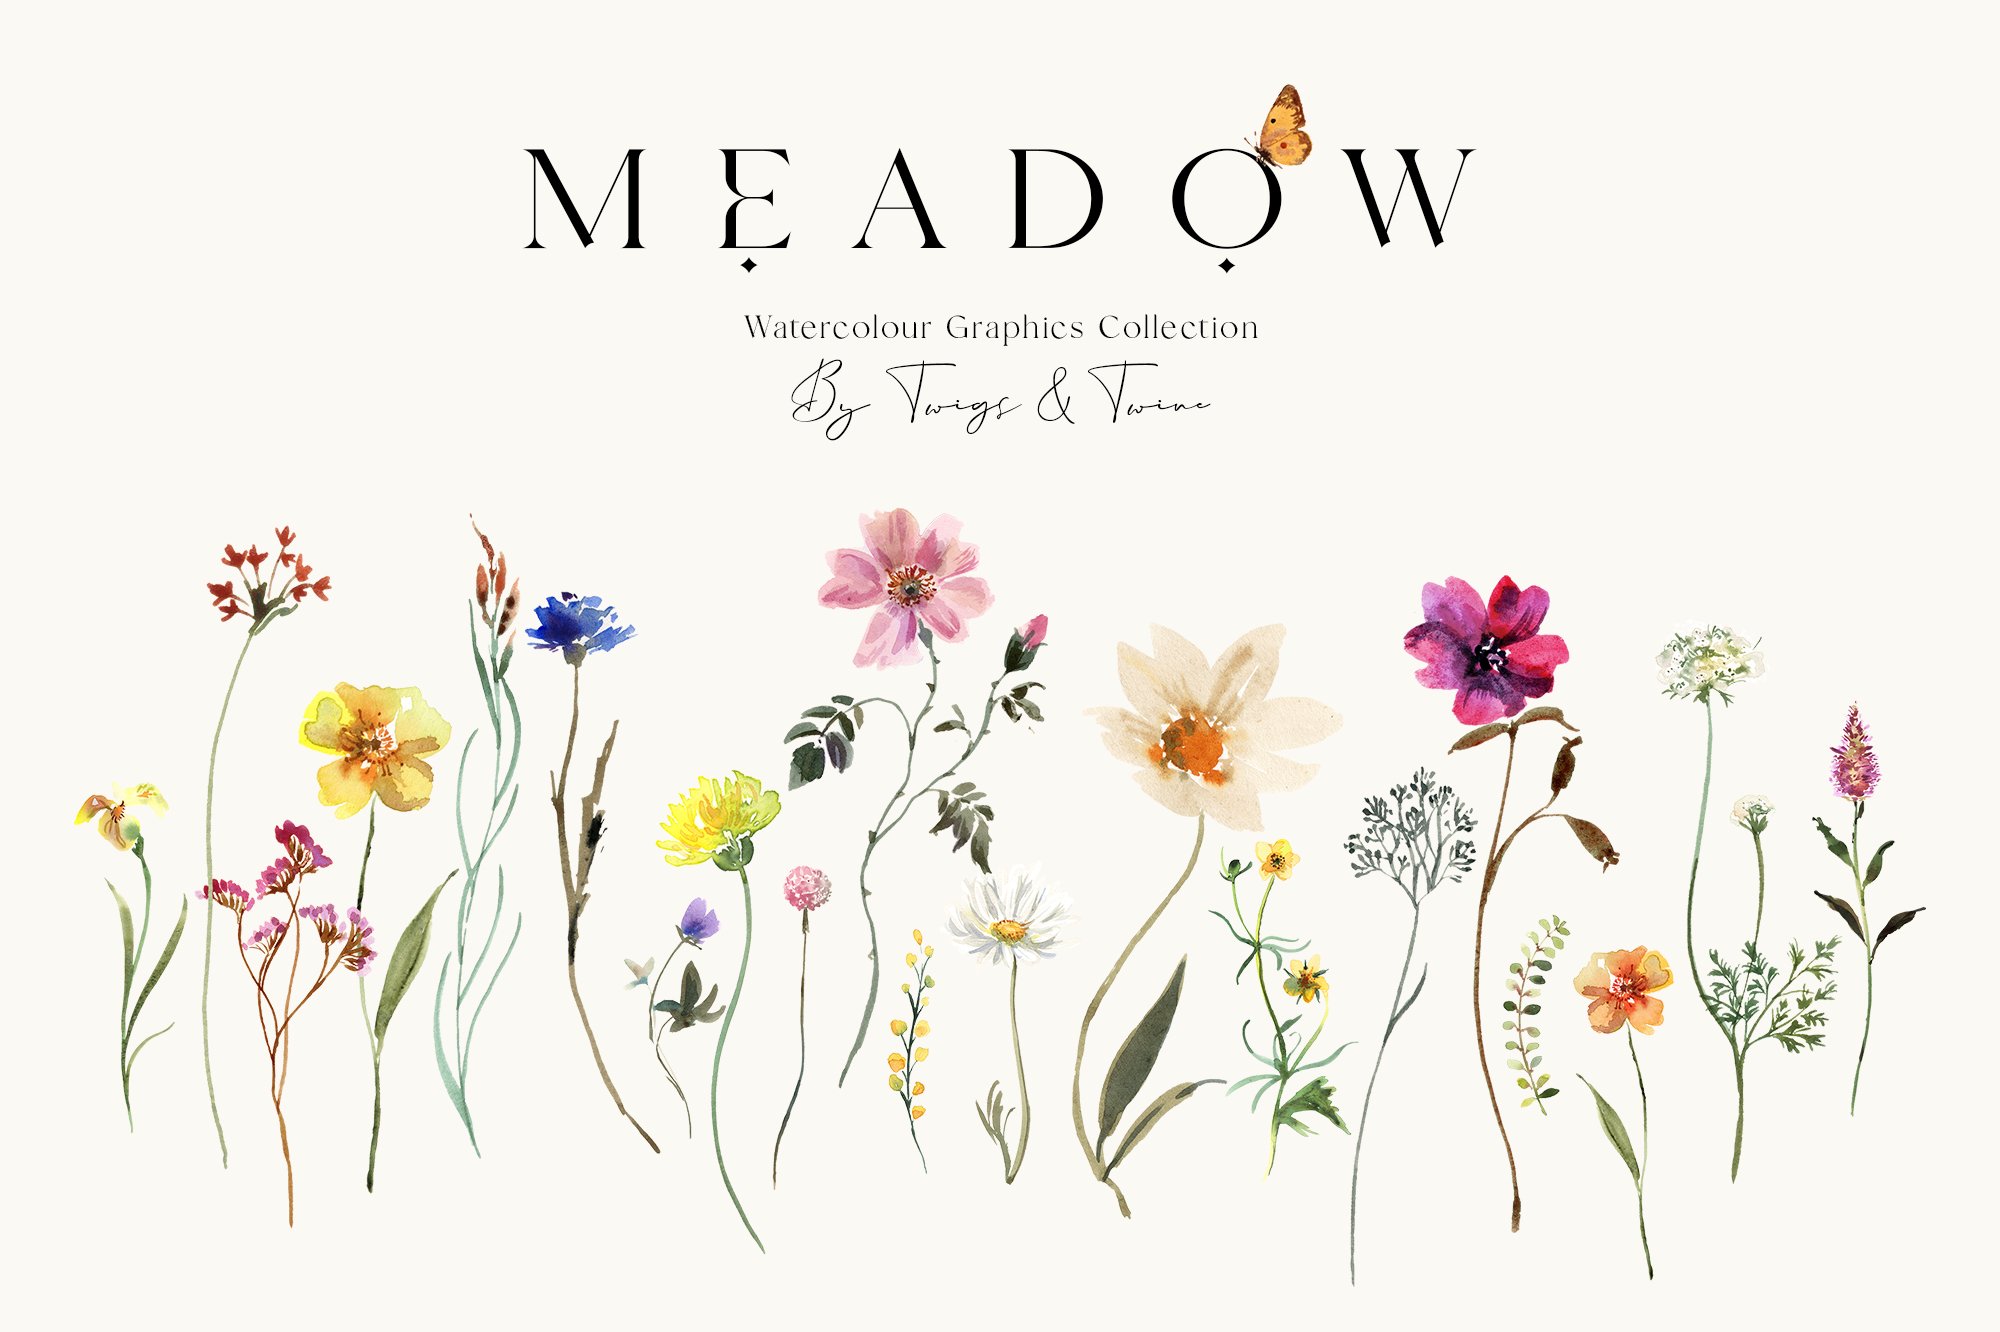 Meadow Wildflower Graphics cover image.